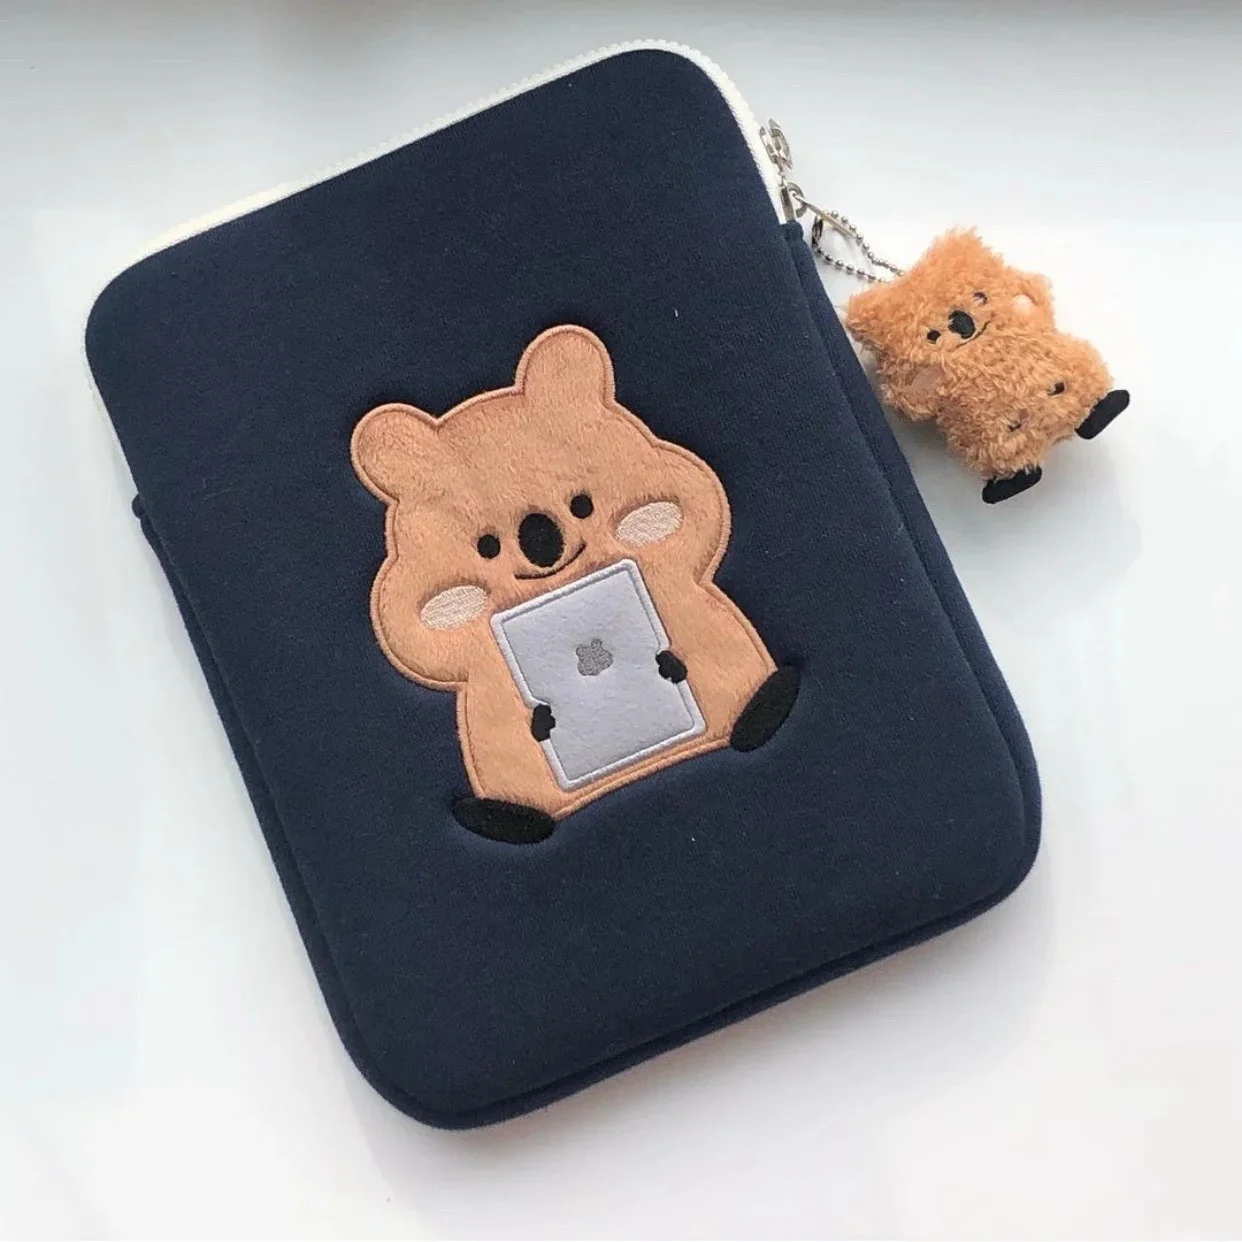 

Korea Cute Squirrel Tablet Laptop Bag Embroidery Mac iPad Pro 9.7 10.5 11 13 15 Inch Protective Cover Sleeve Case iPad Inner Bag